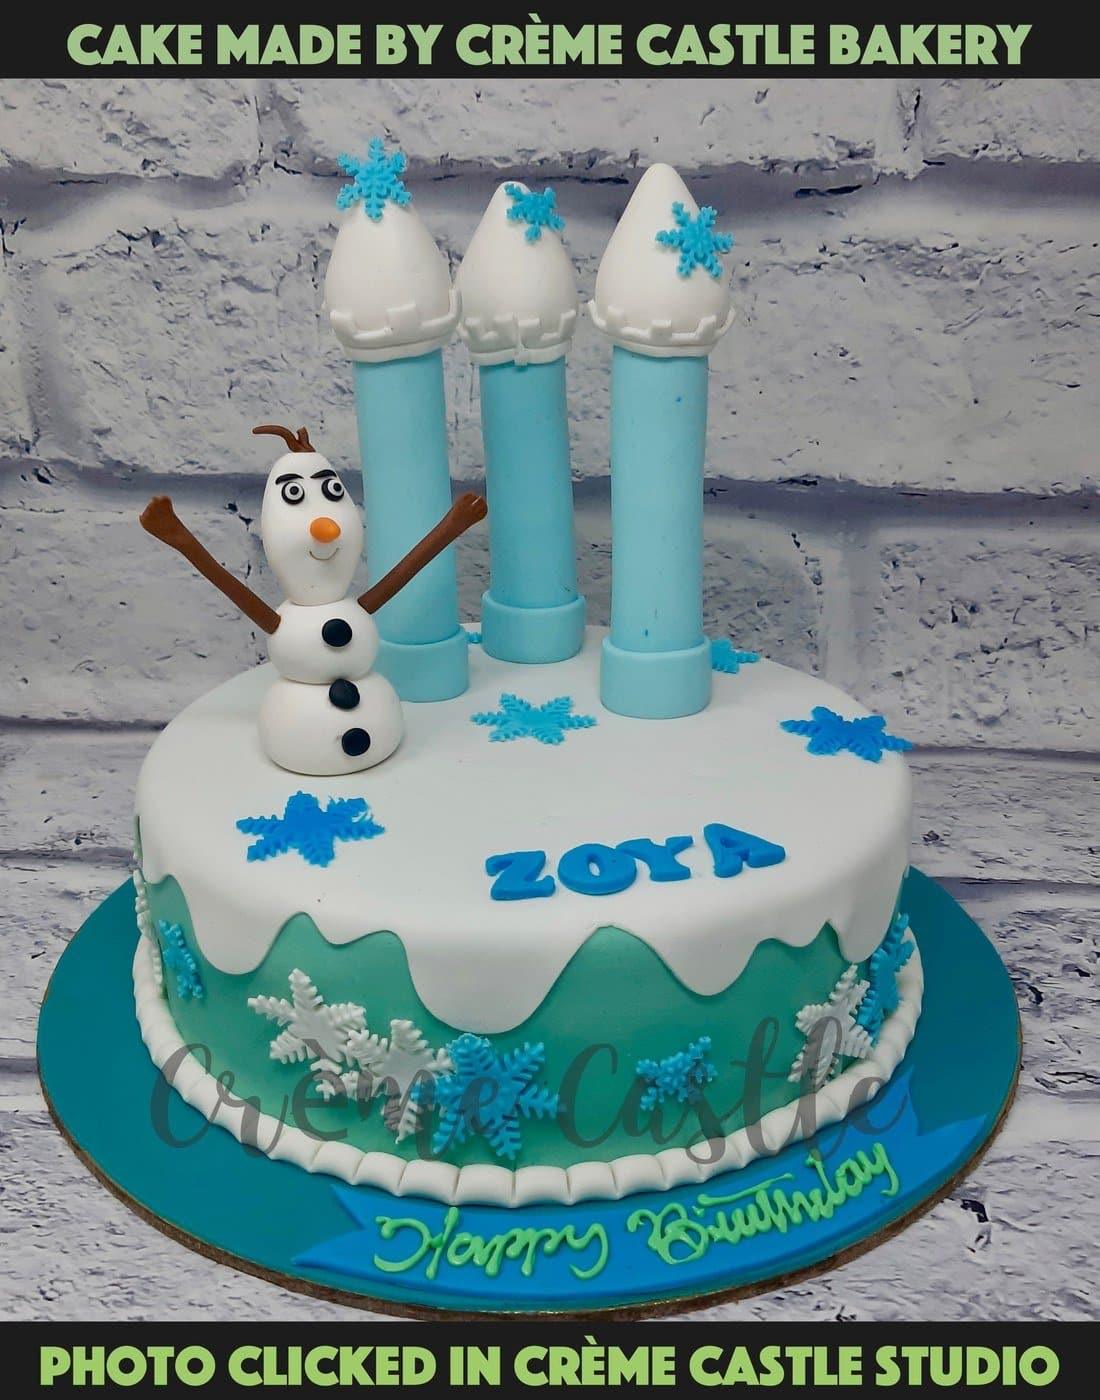 Olaf in Winter land Theme Cake - Creme Castle